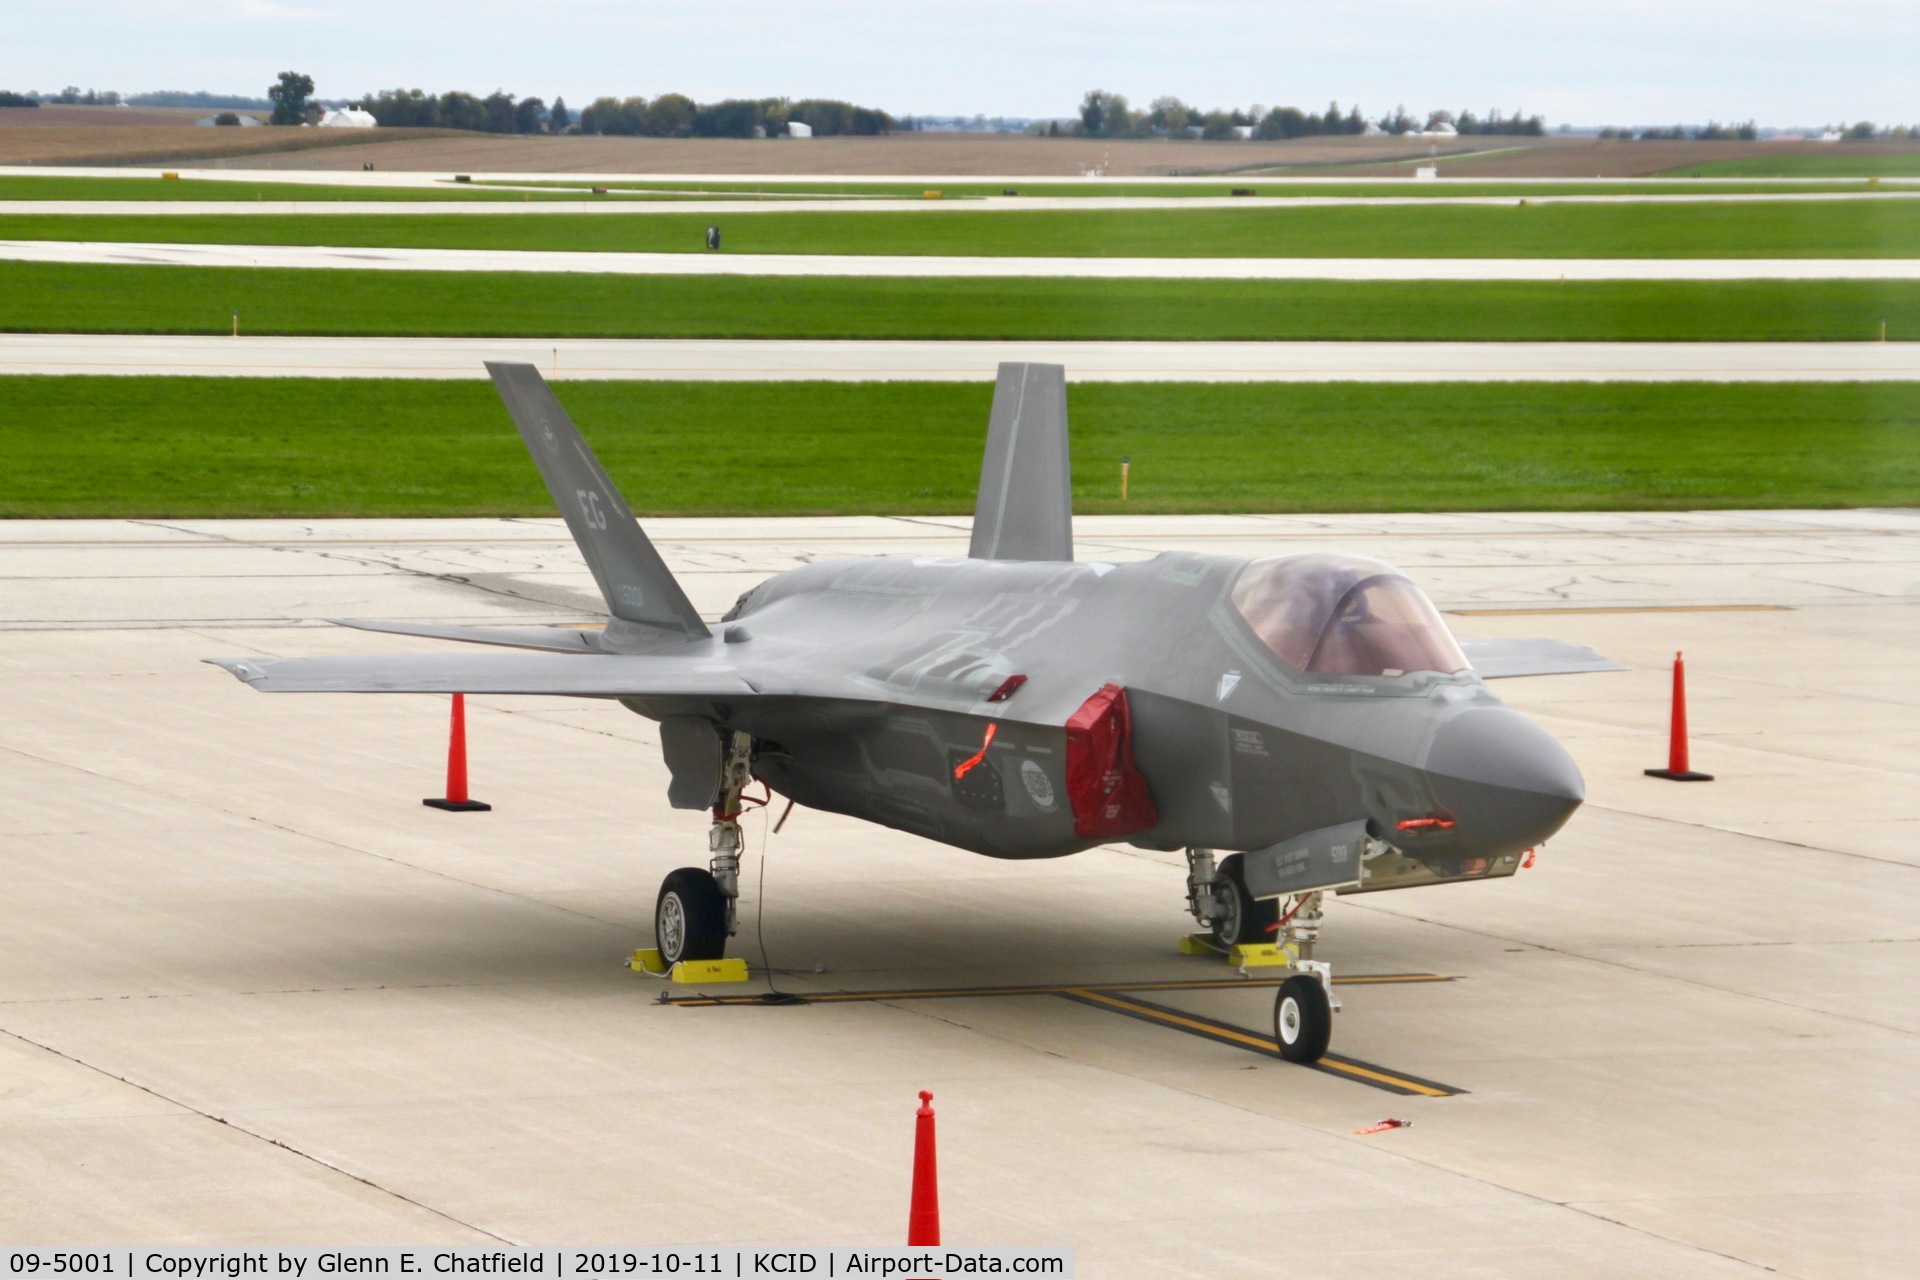 09-5001, 2011 Lockheed Martin F-35A Lightning II C/N AF-14, Photographed from the control tower